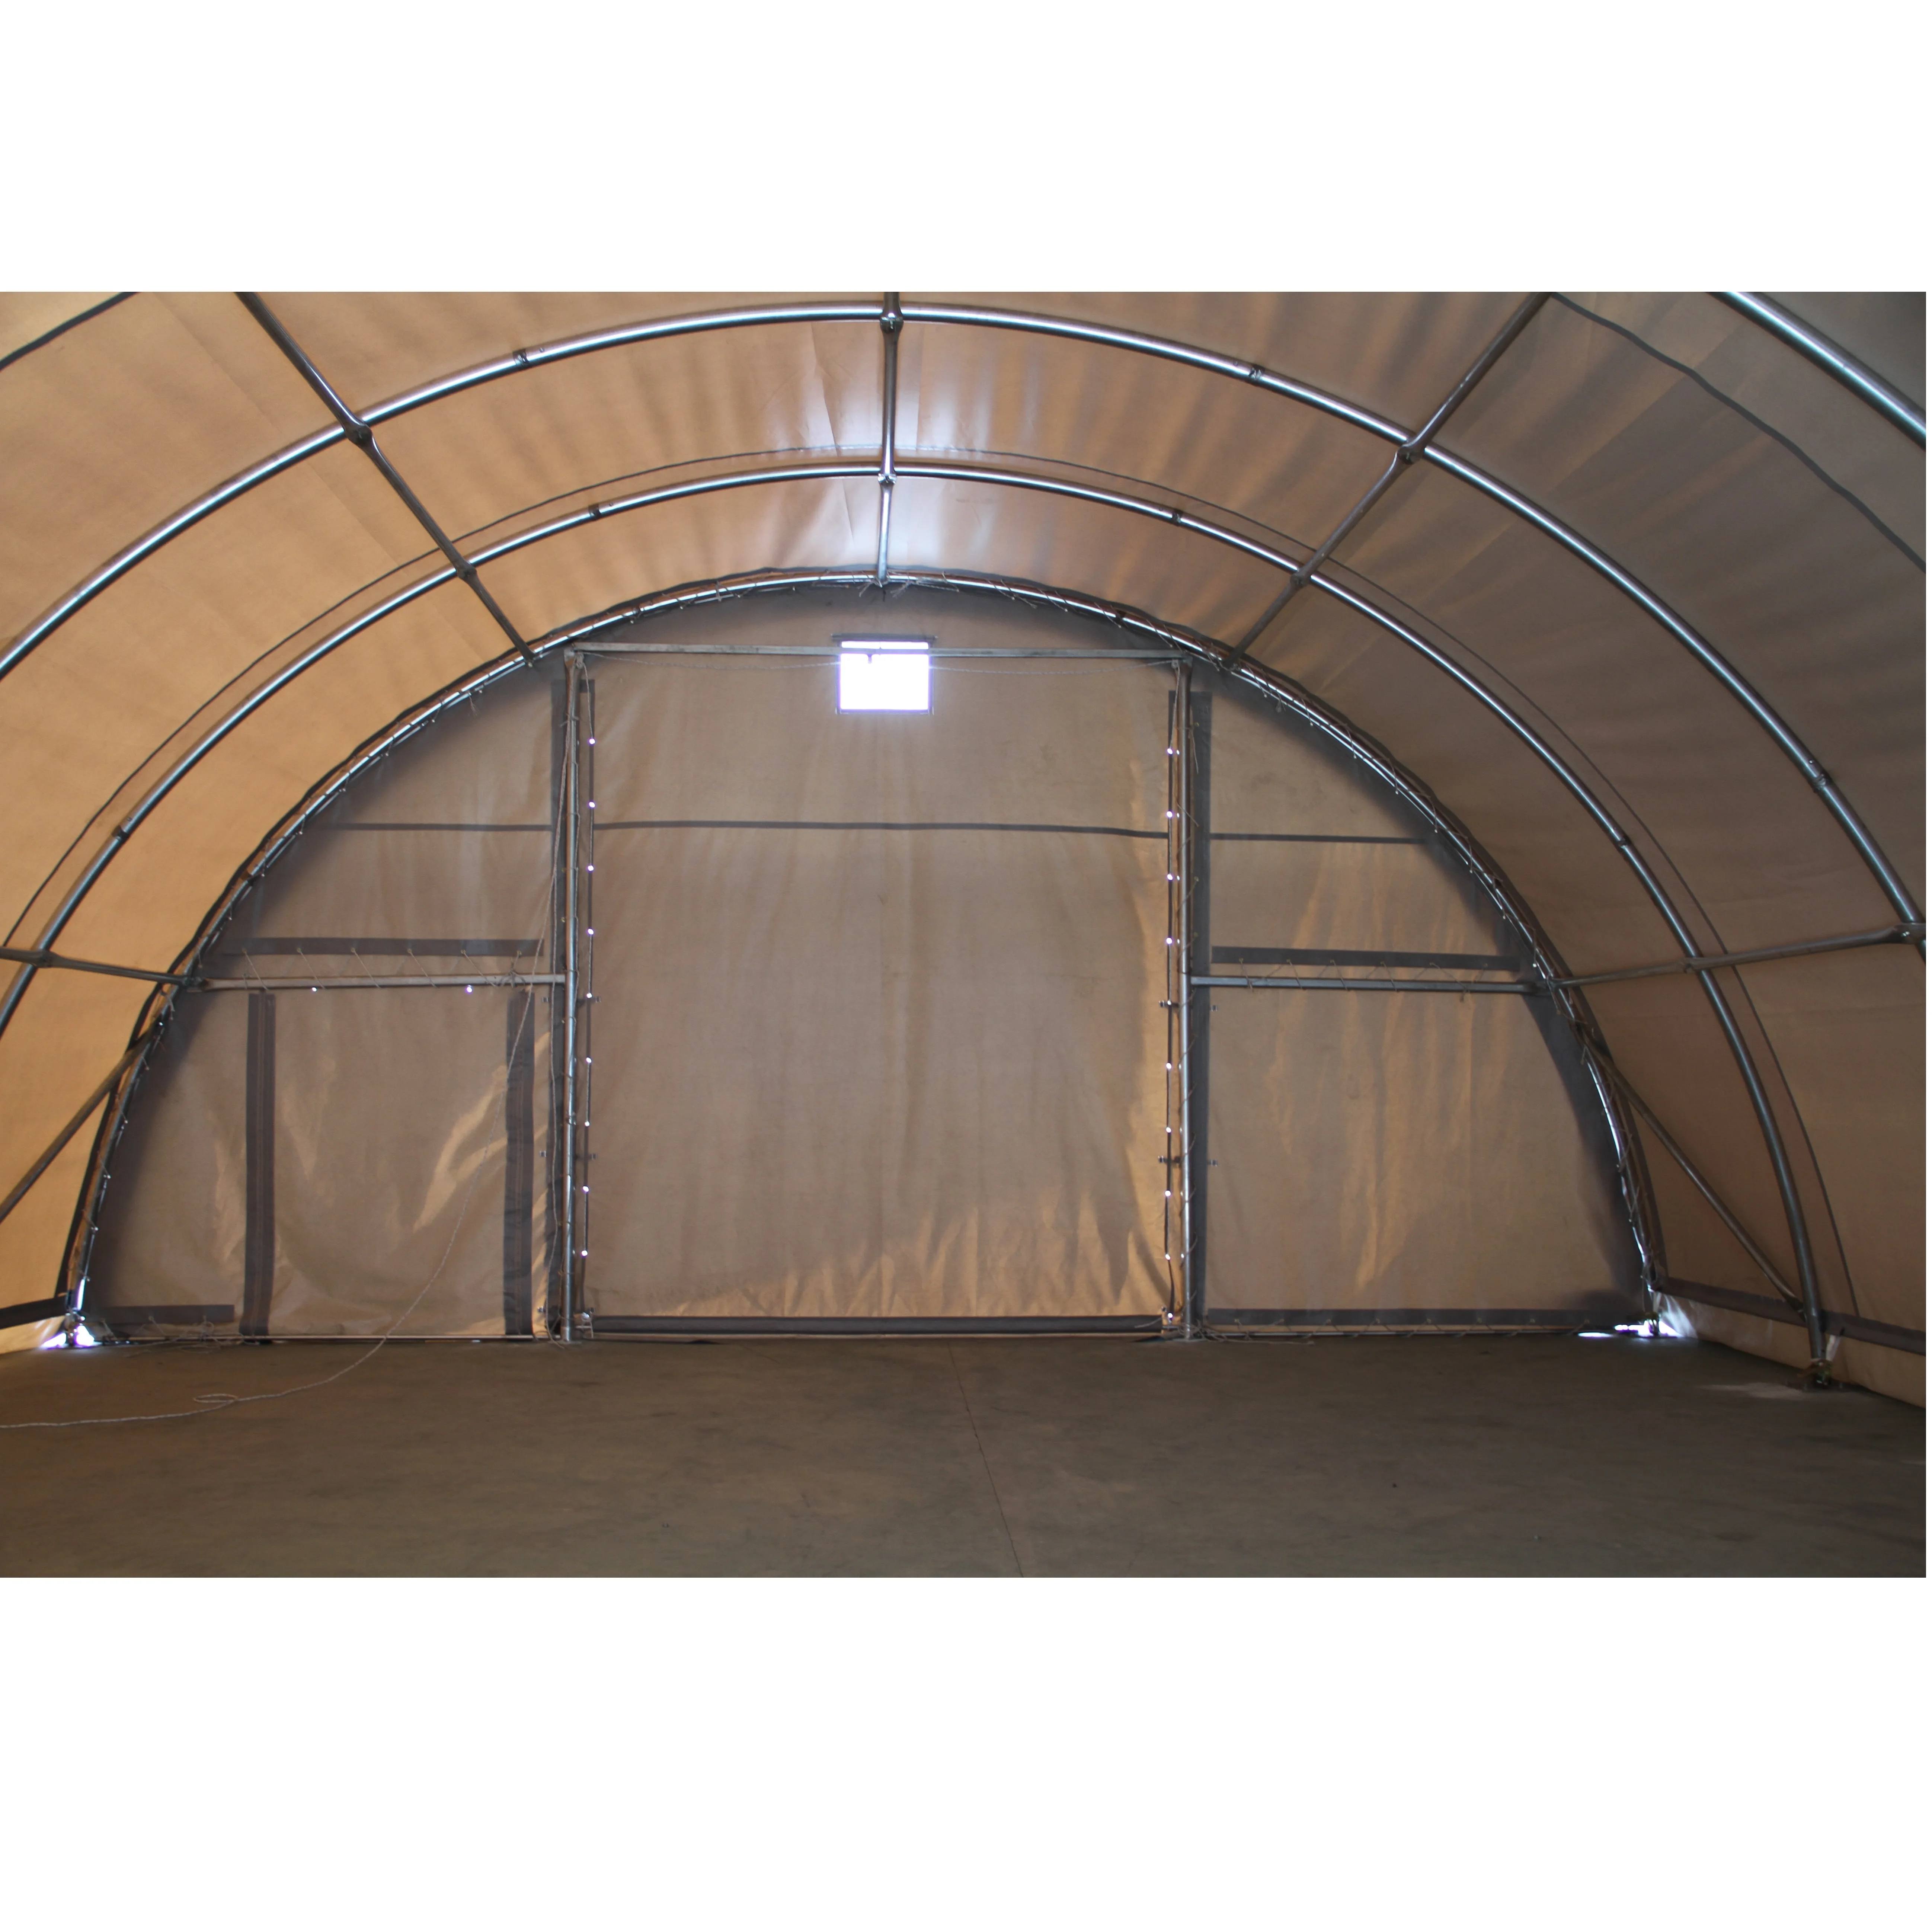 Dome Suihe Storage Fabric Building Tent S306515R